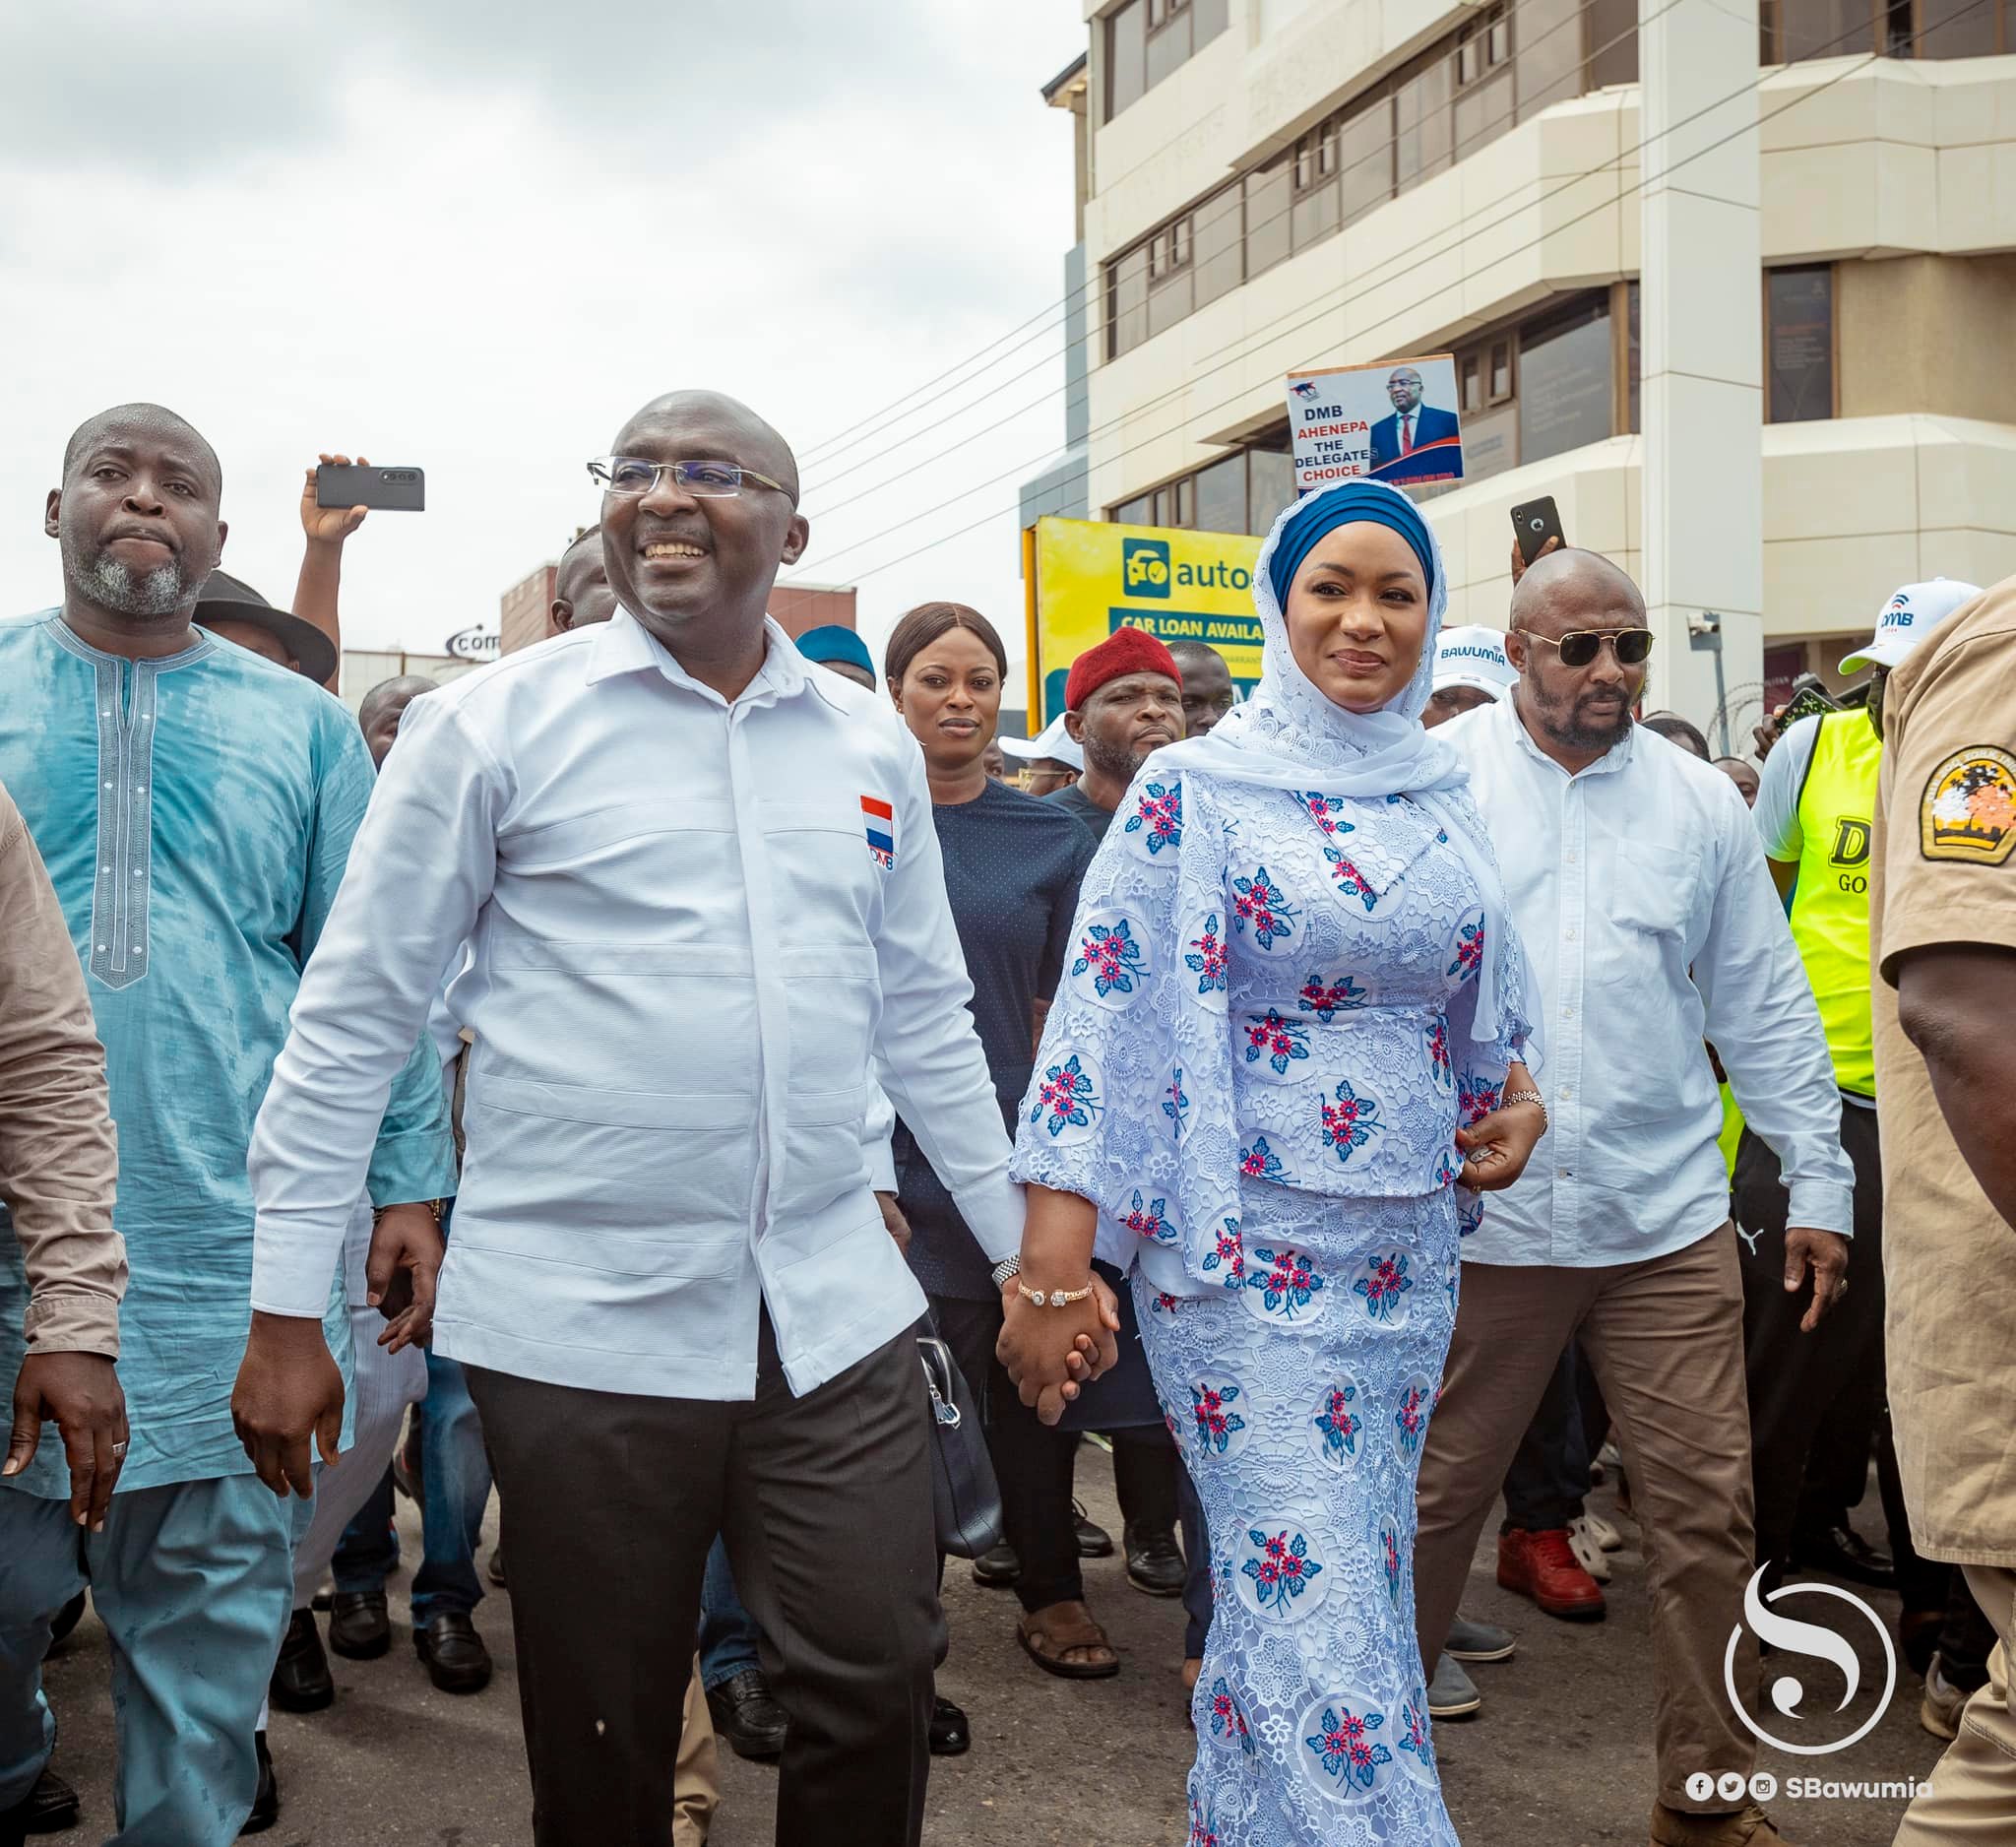 Samira Bawumia could be Ghana's next First Lady after the 2024 elections.